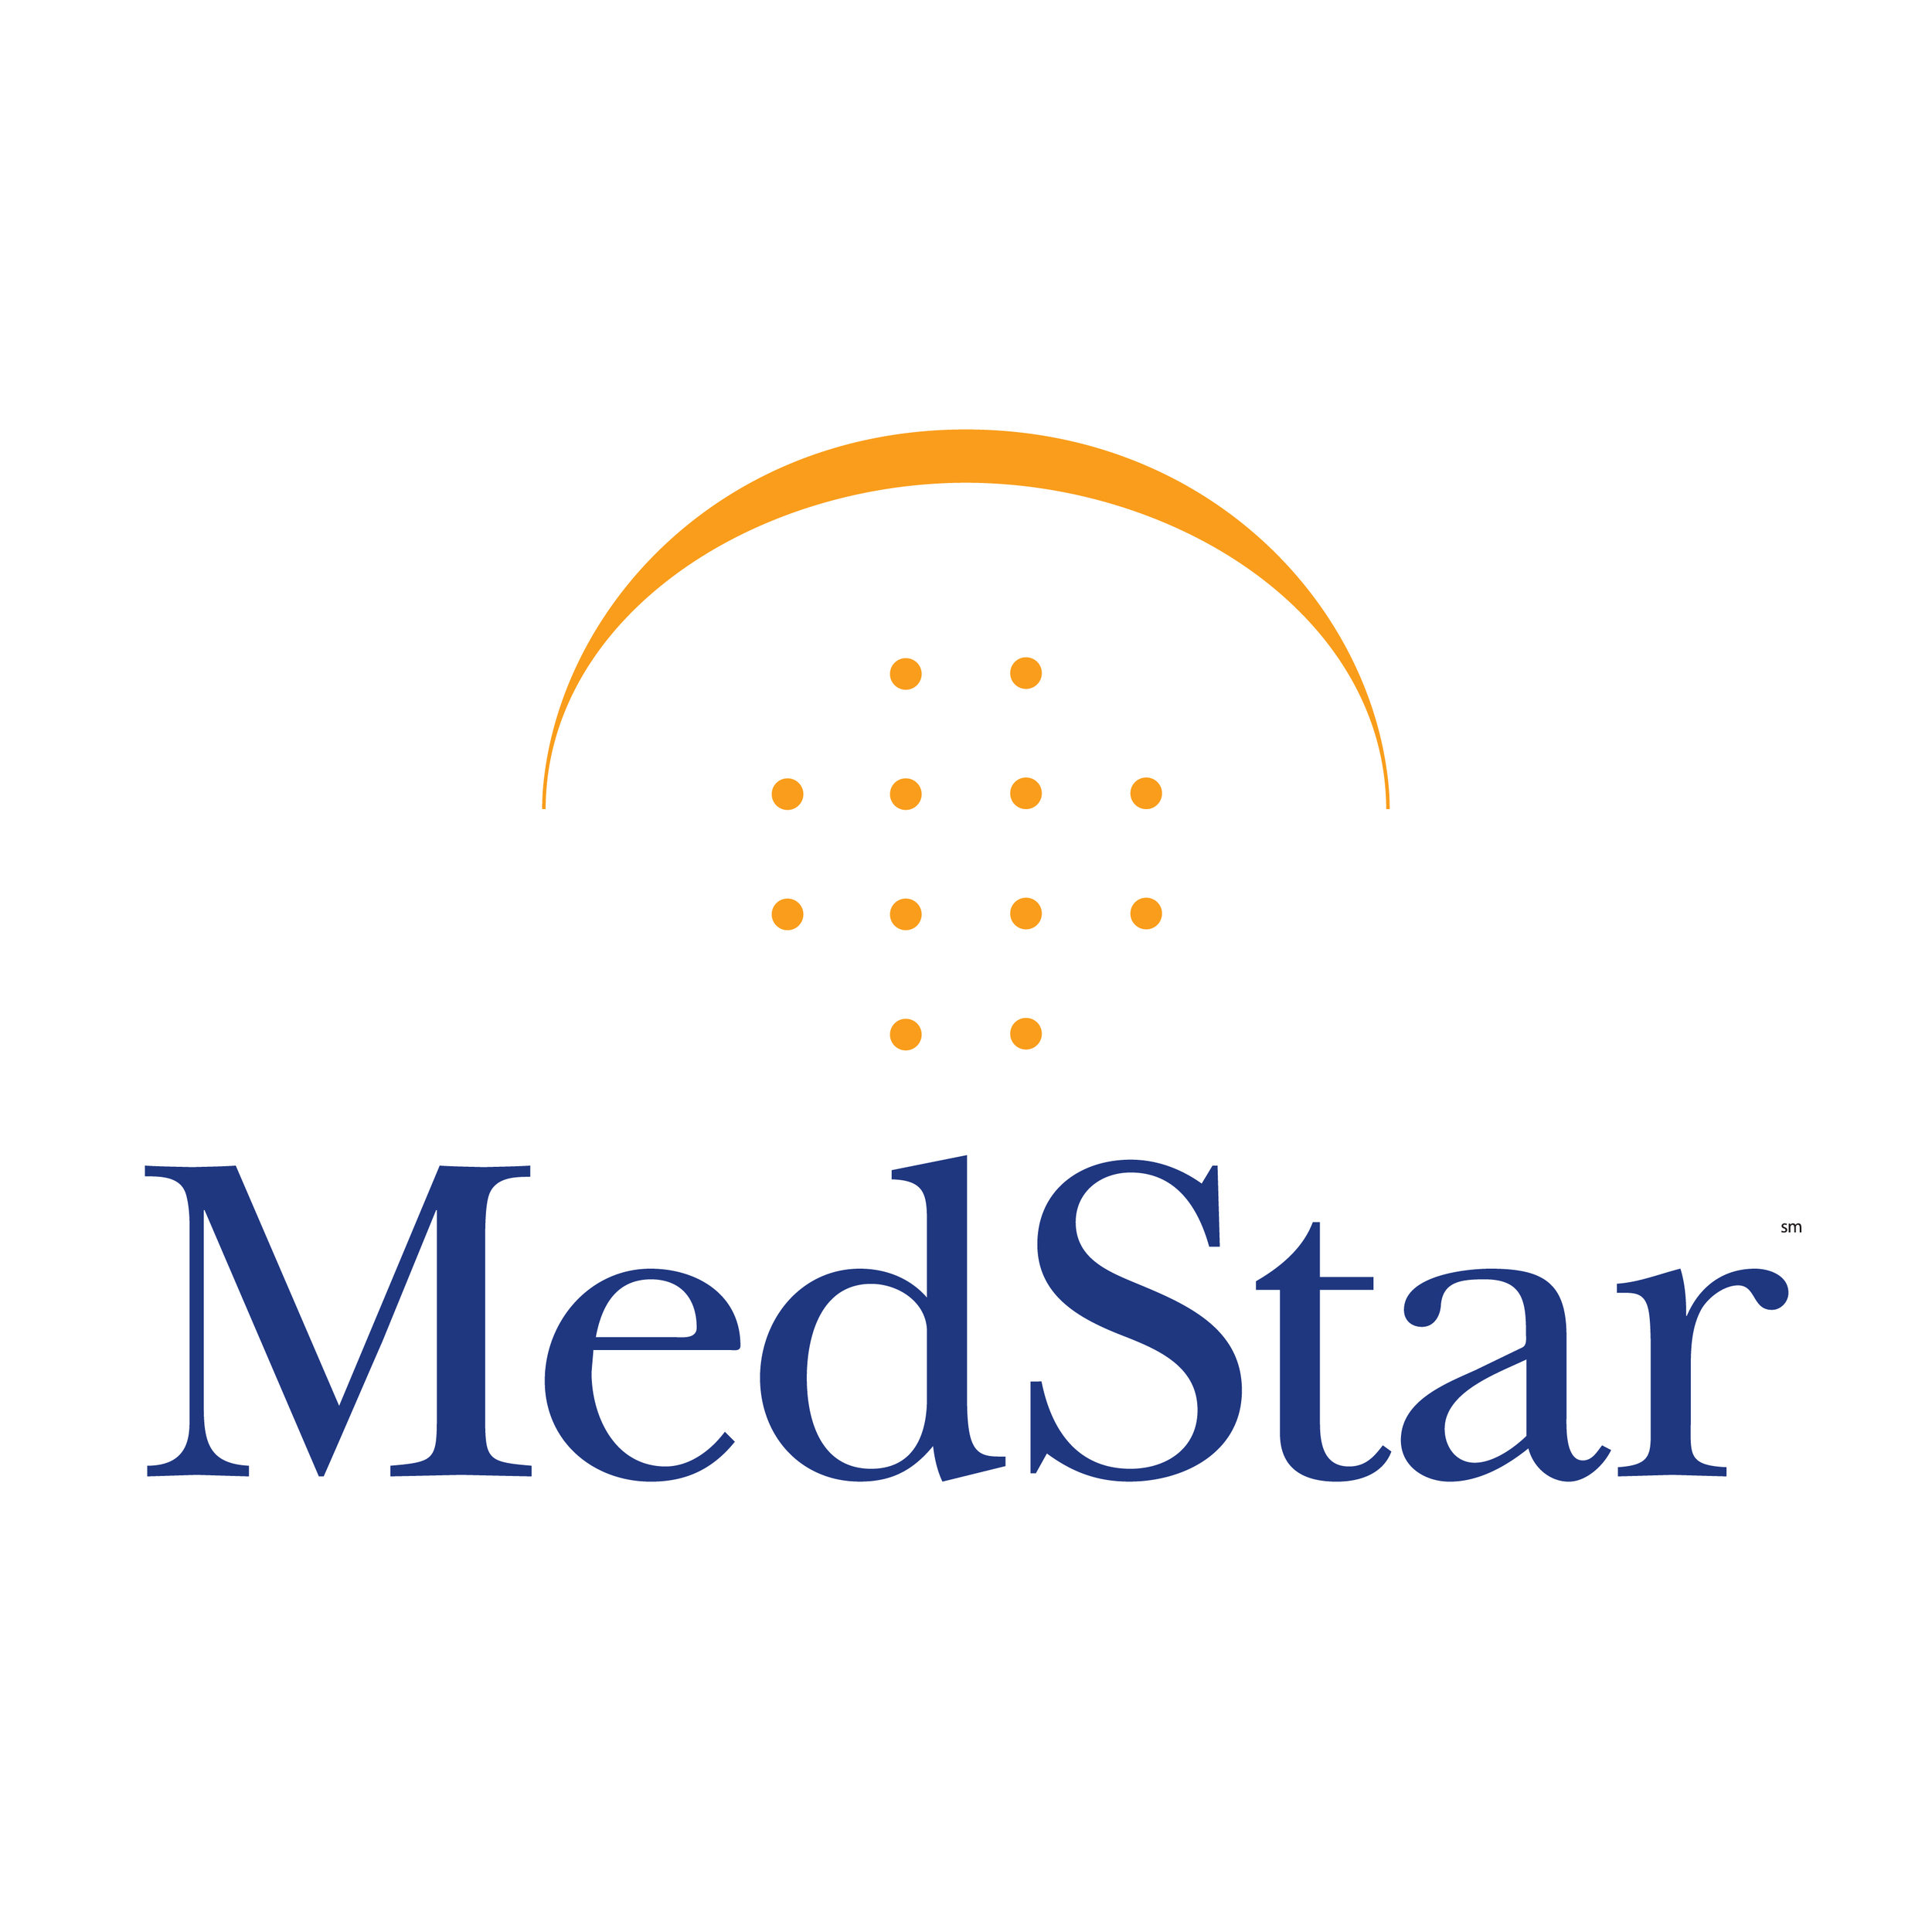  MedStar services  The MED, Regional Medical Center at Memphis   Branding creative and design by Chuck Mitchell 